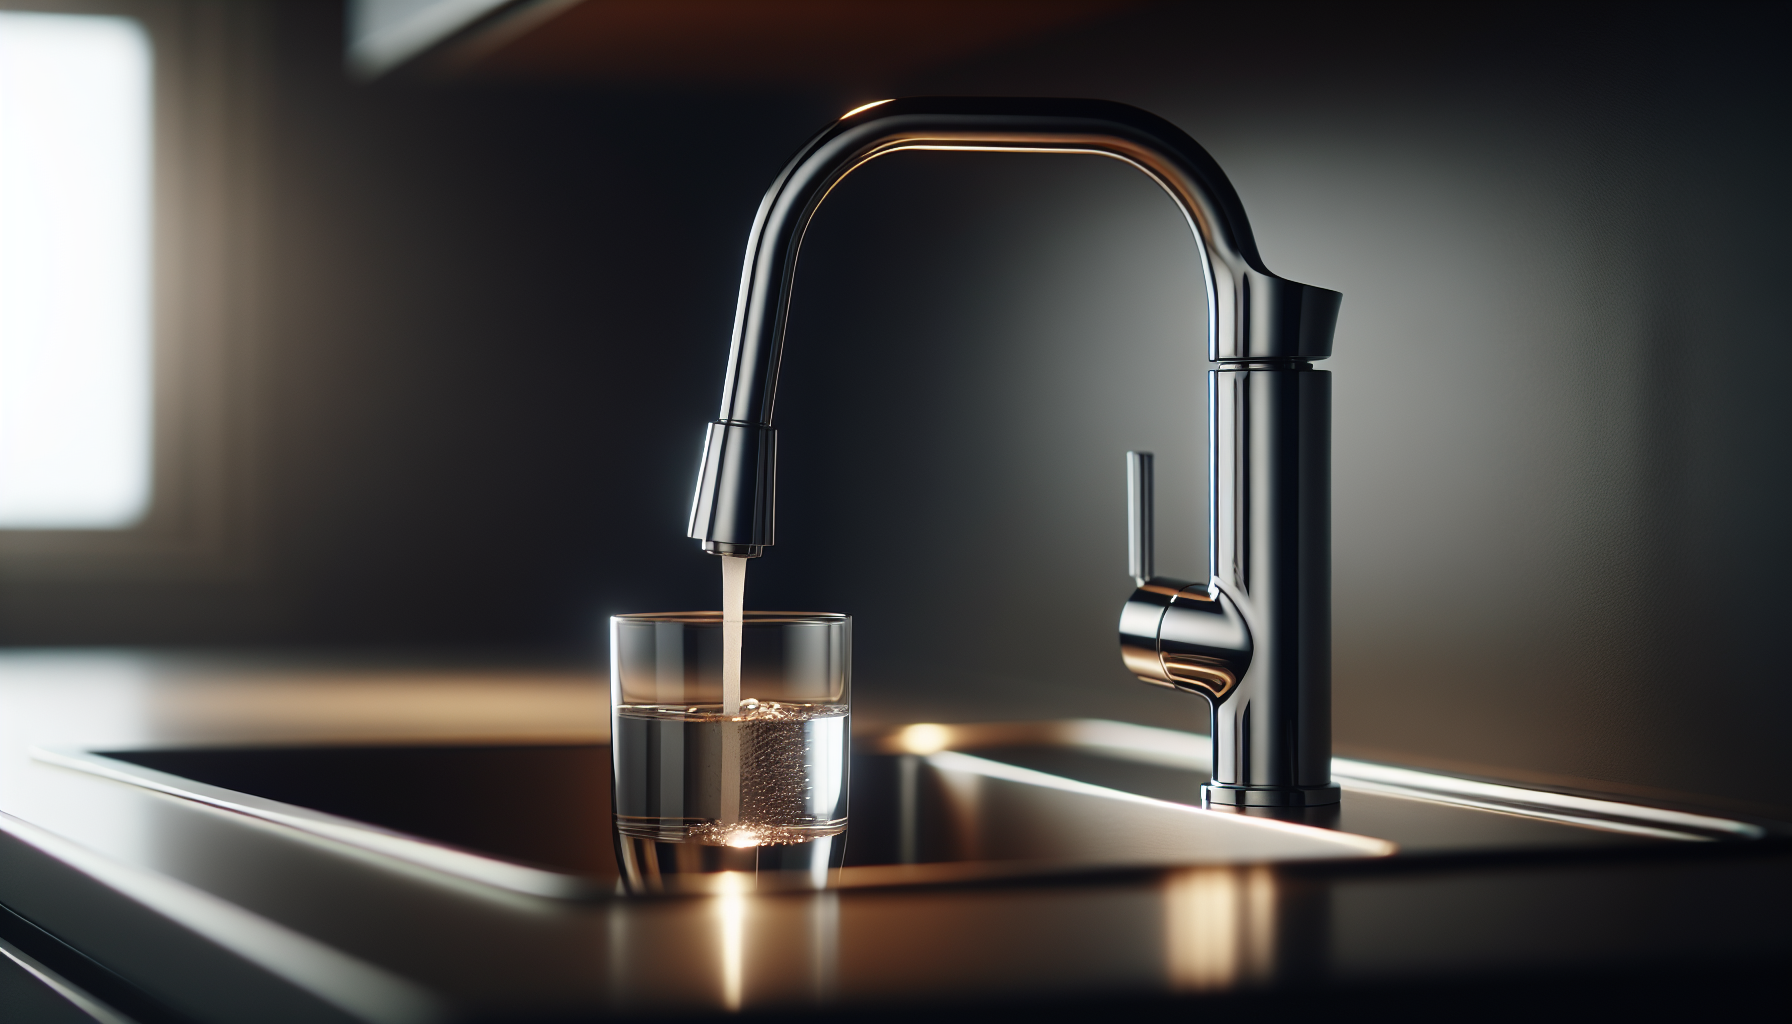 A kitchen tap with a built-in water filter system